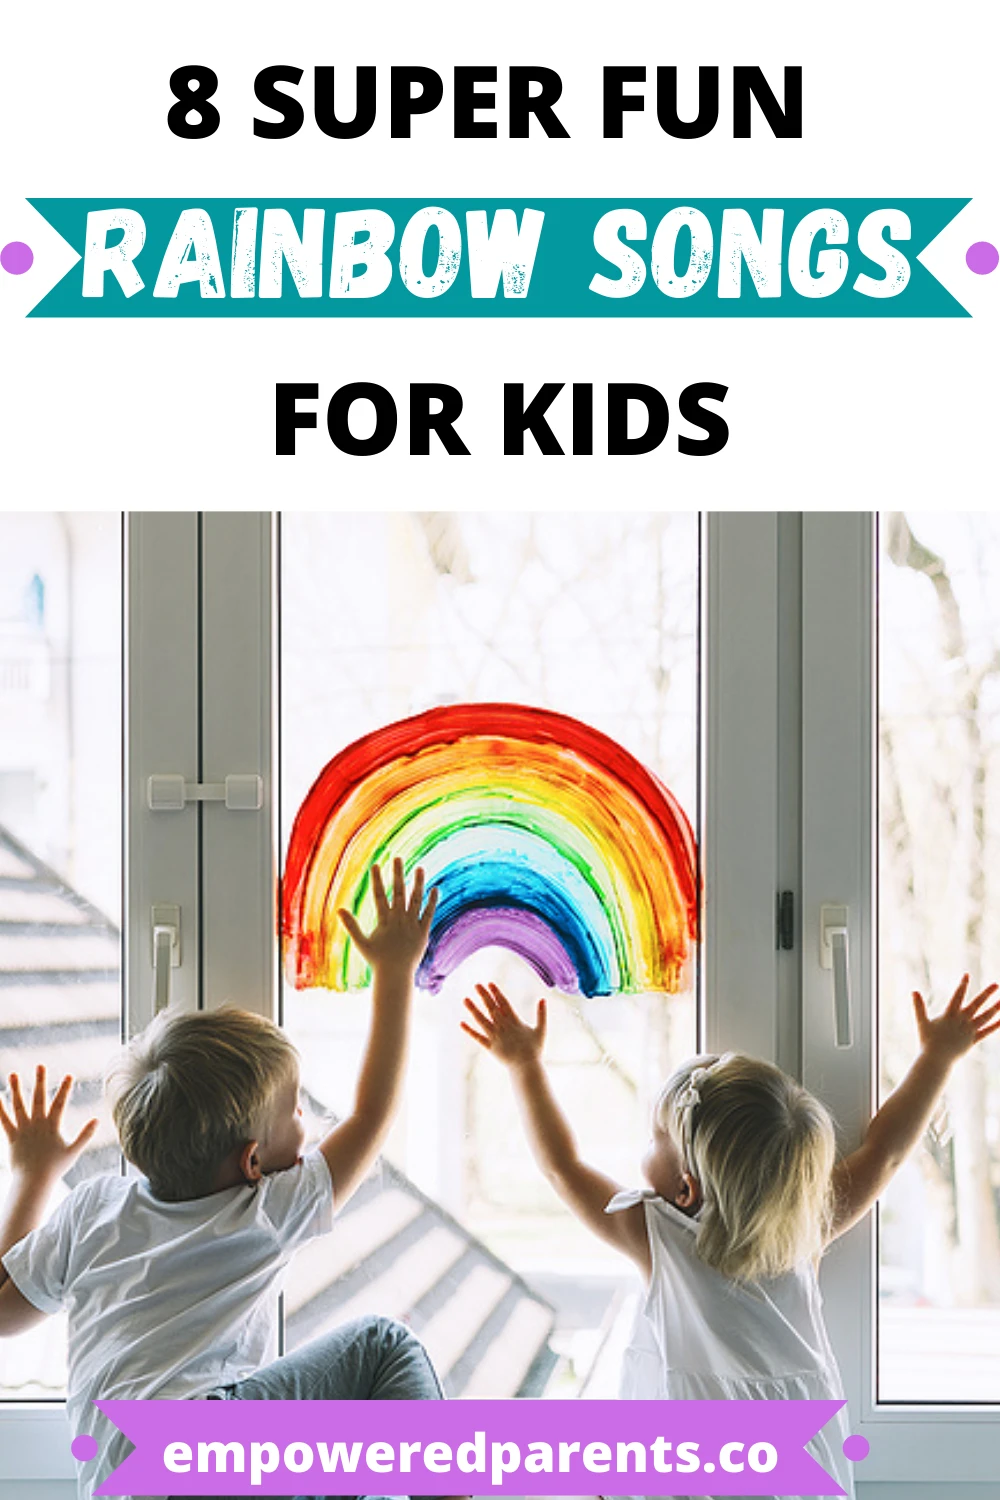 8 Fun Rainbow Songs for Kids (with Lyrics) - Empowered Parents